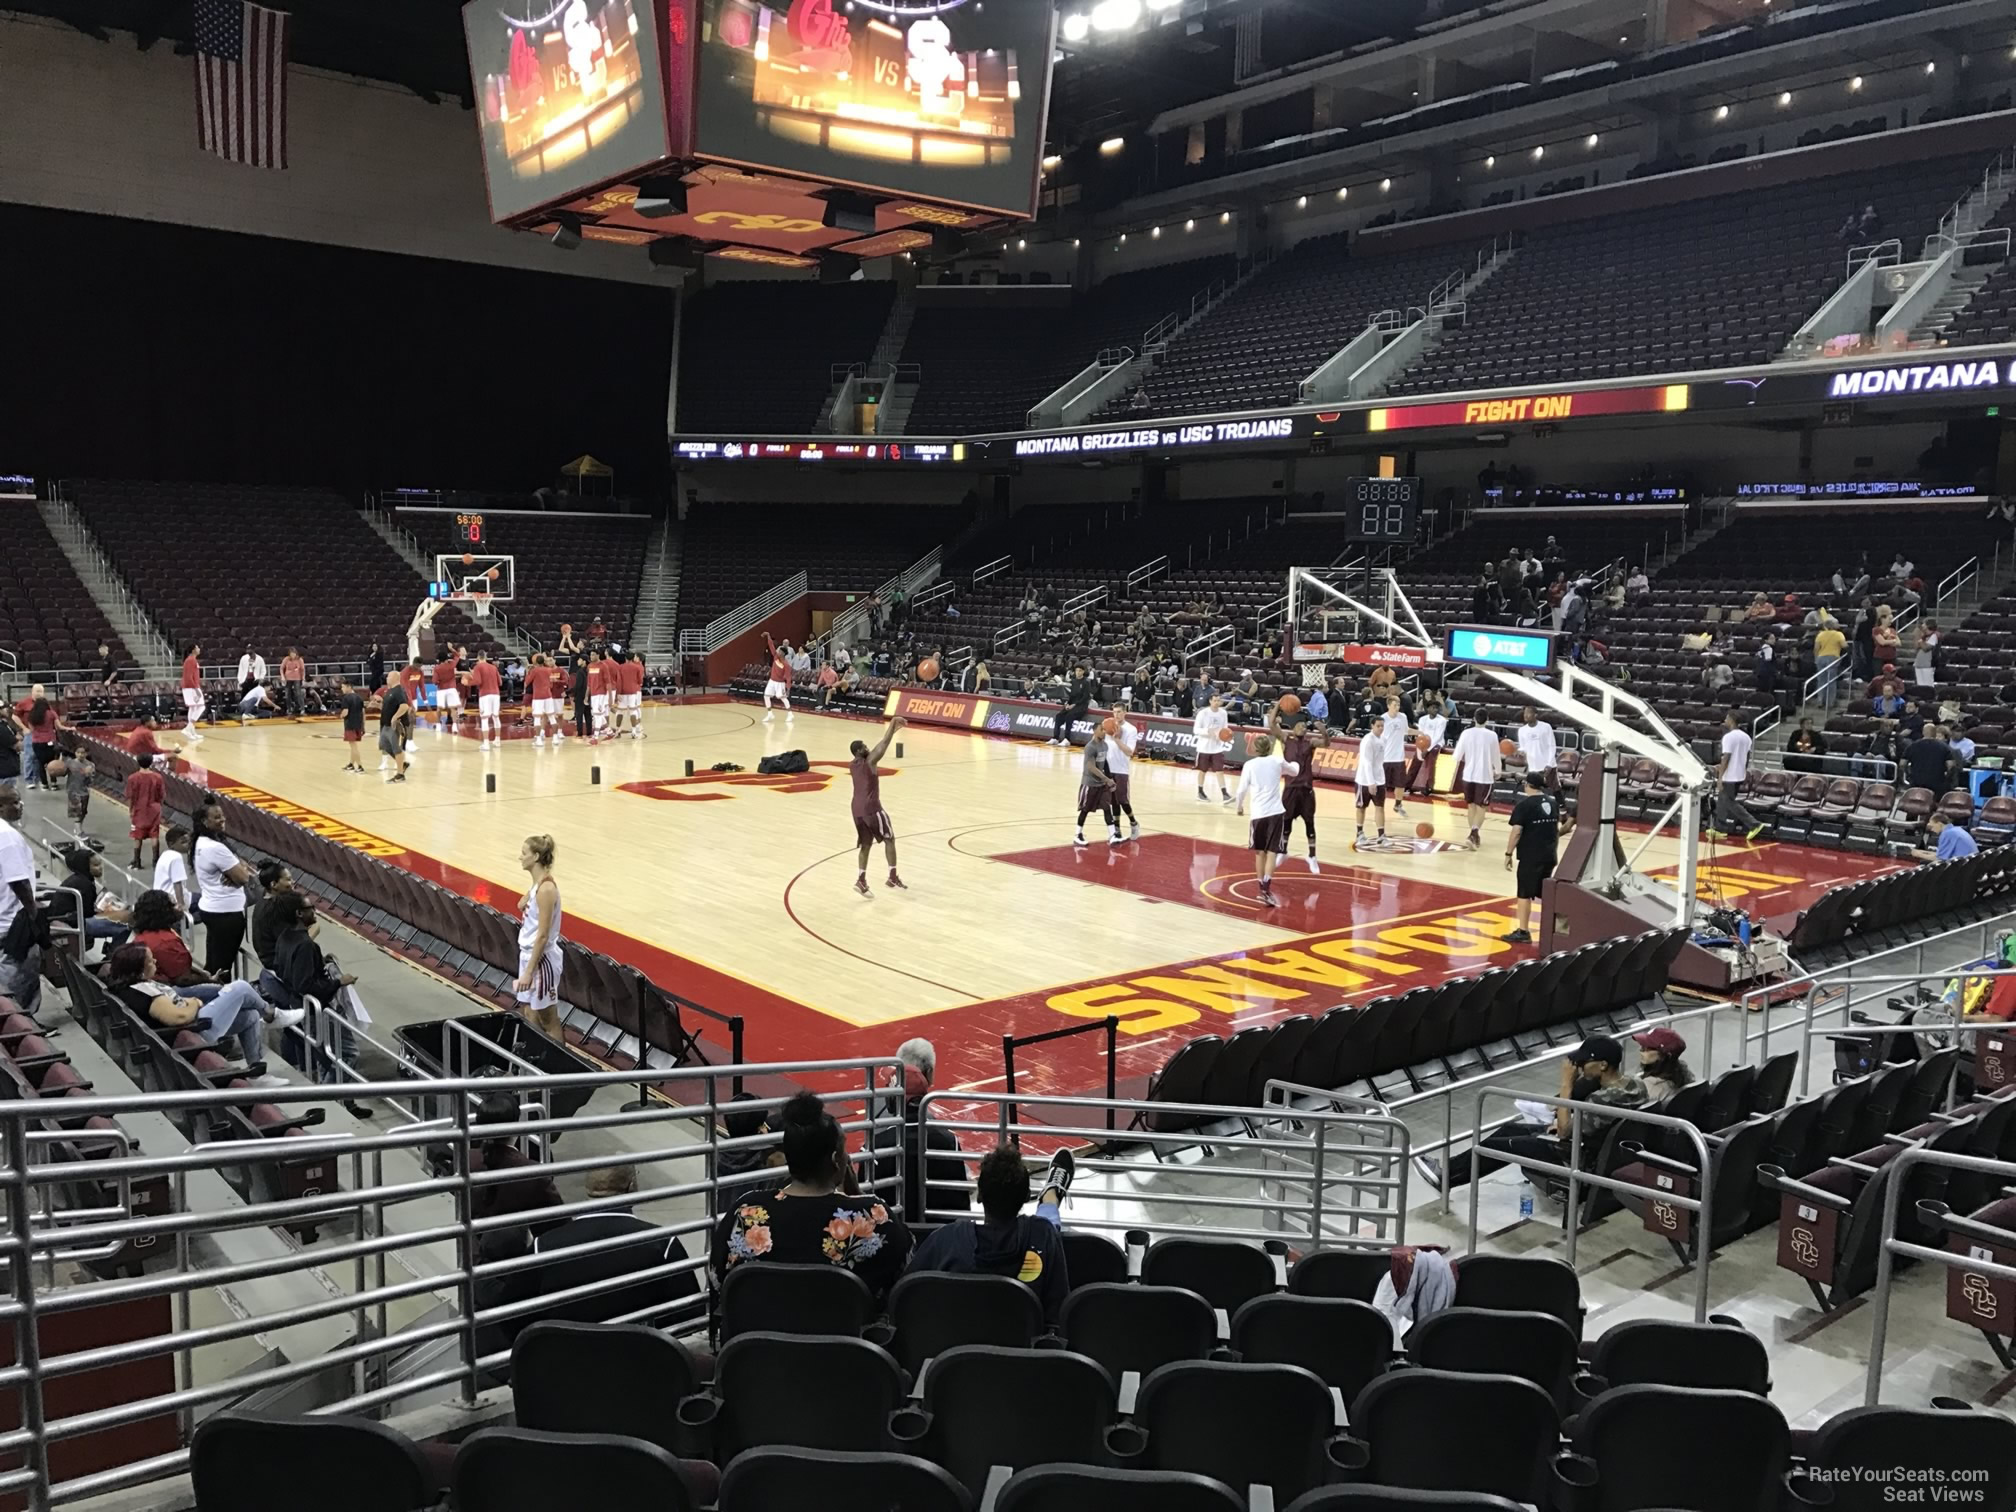 section 108, row 10 seat view  - galen center